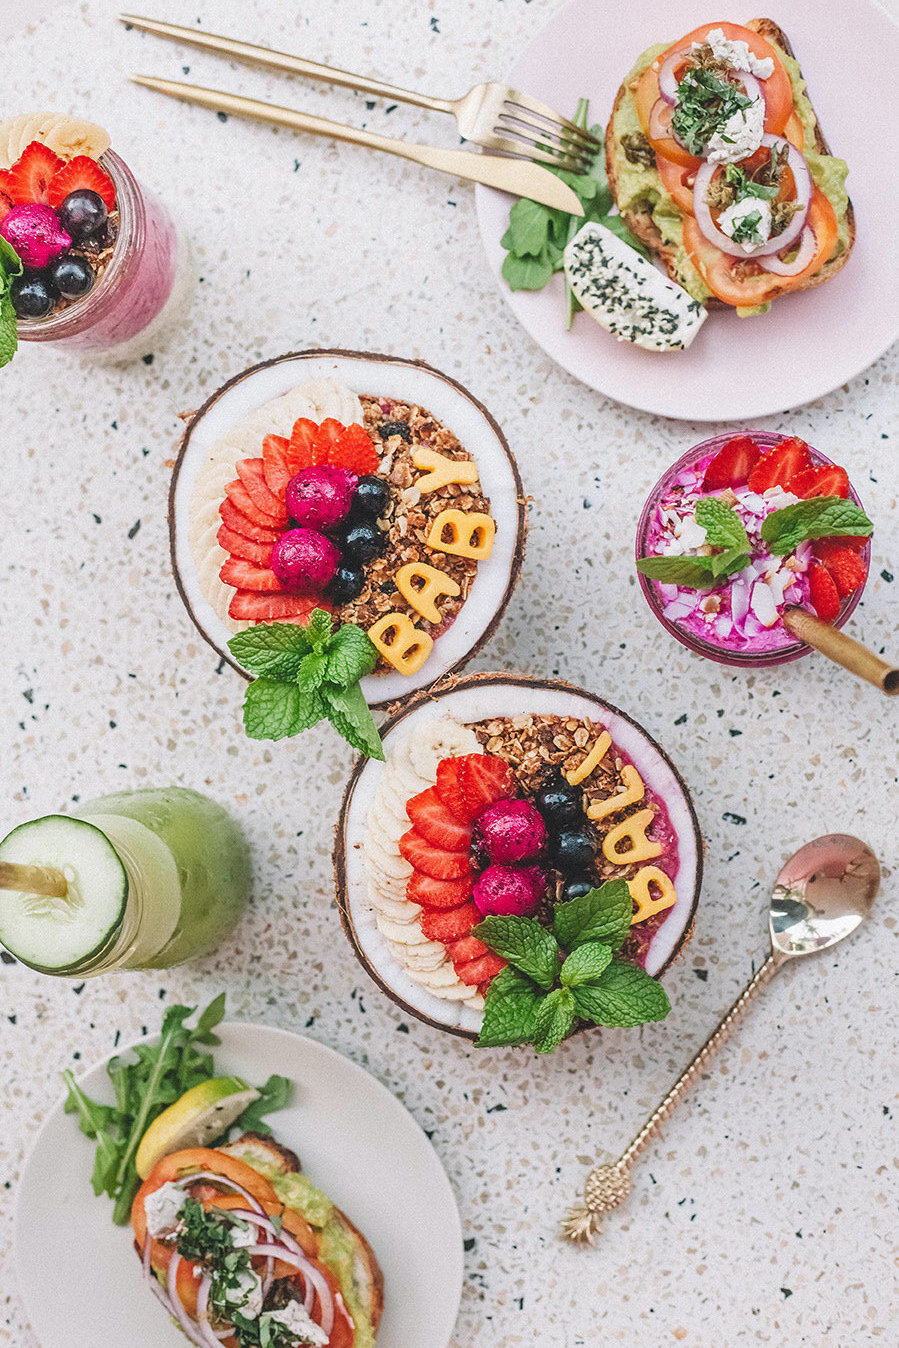 Brunch spread of açai bowls, avocado toast, smoothie bowls at Kynd Community cafe in Bali. Cafe voucher as a gift ideas for foodies